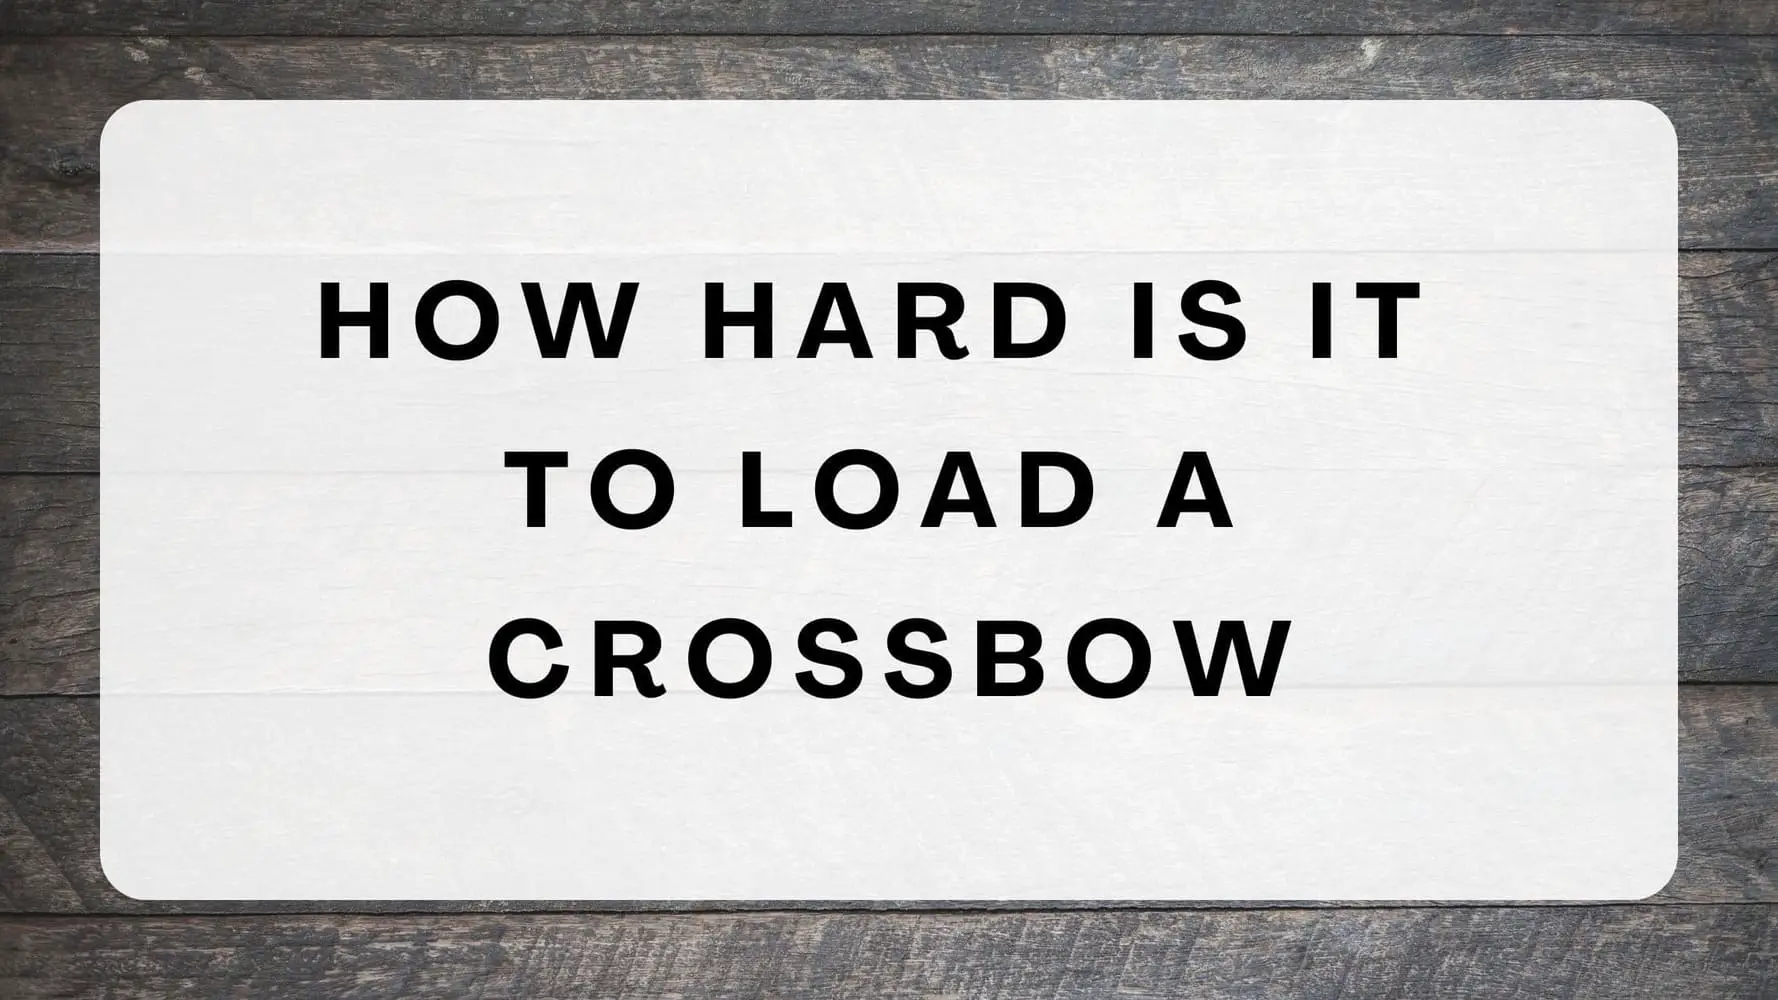 How Hard is it to Load a Crossbow